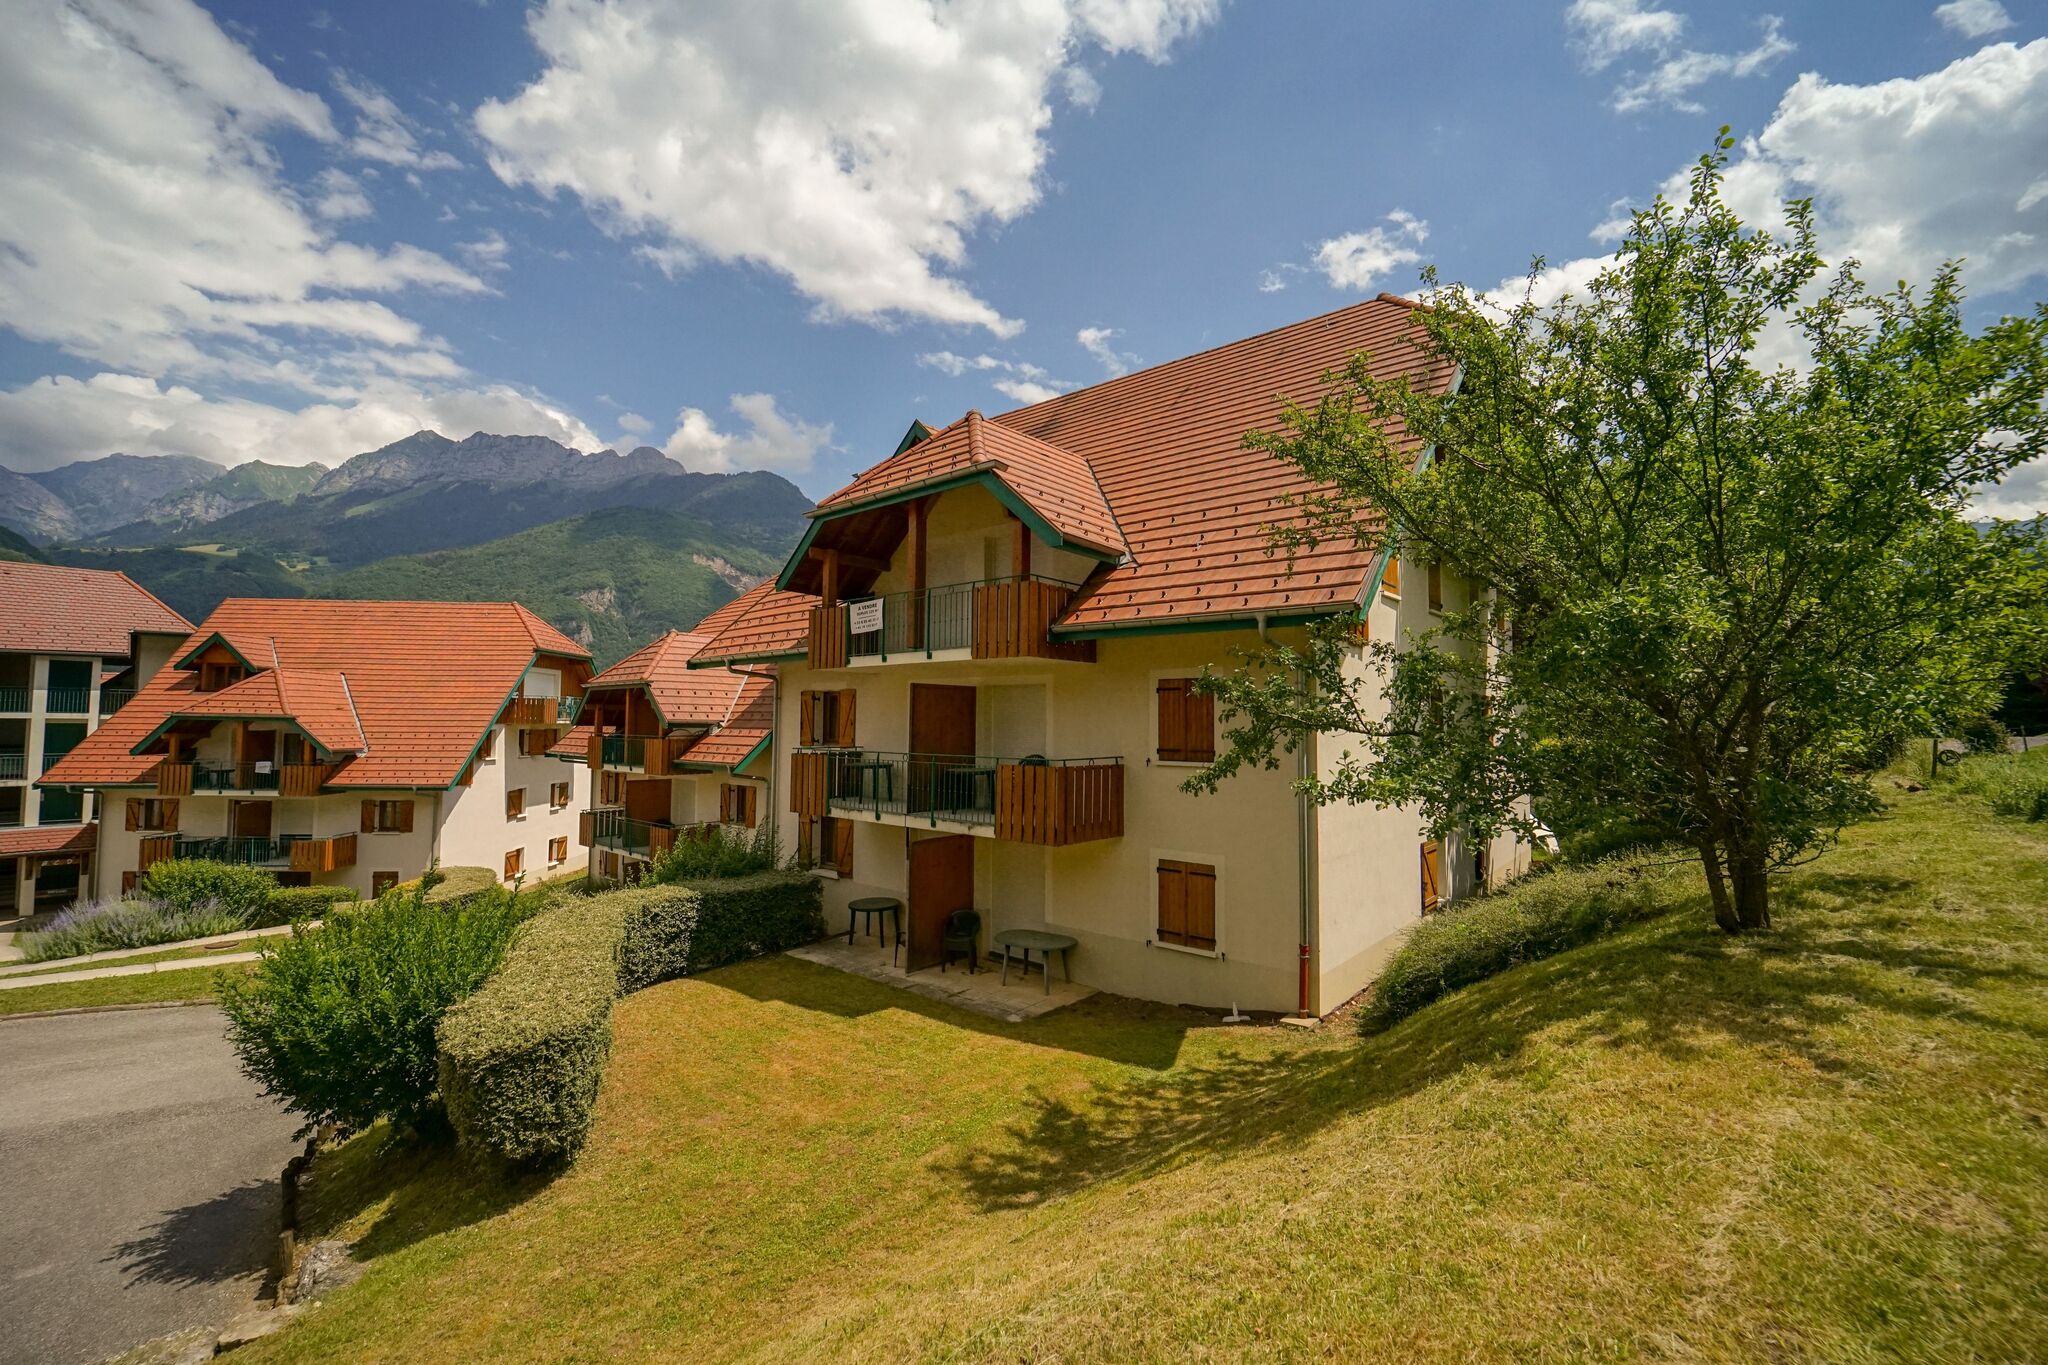 Great holiday spot in the Haute-Savoie near Lake Annecy